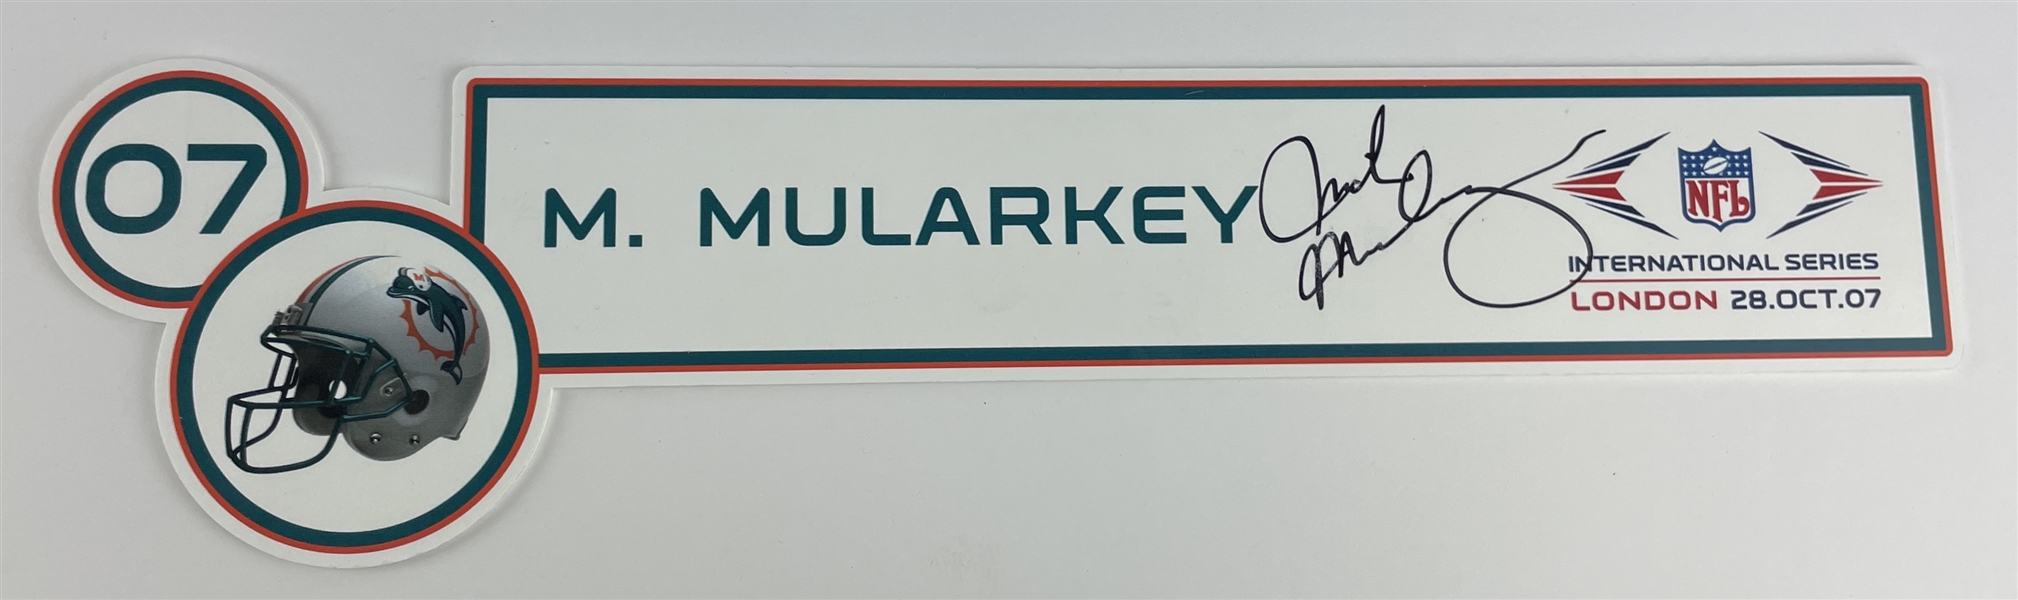 NFL : Autographed Mike Mularkey Miami Dolphins Locker Nameplate from 2007 London Game vs. NYG (JSA COA)(Coach Mike Mularkey Collection)